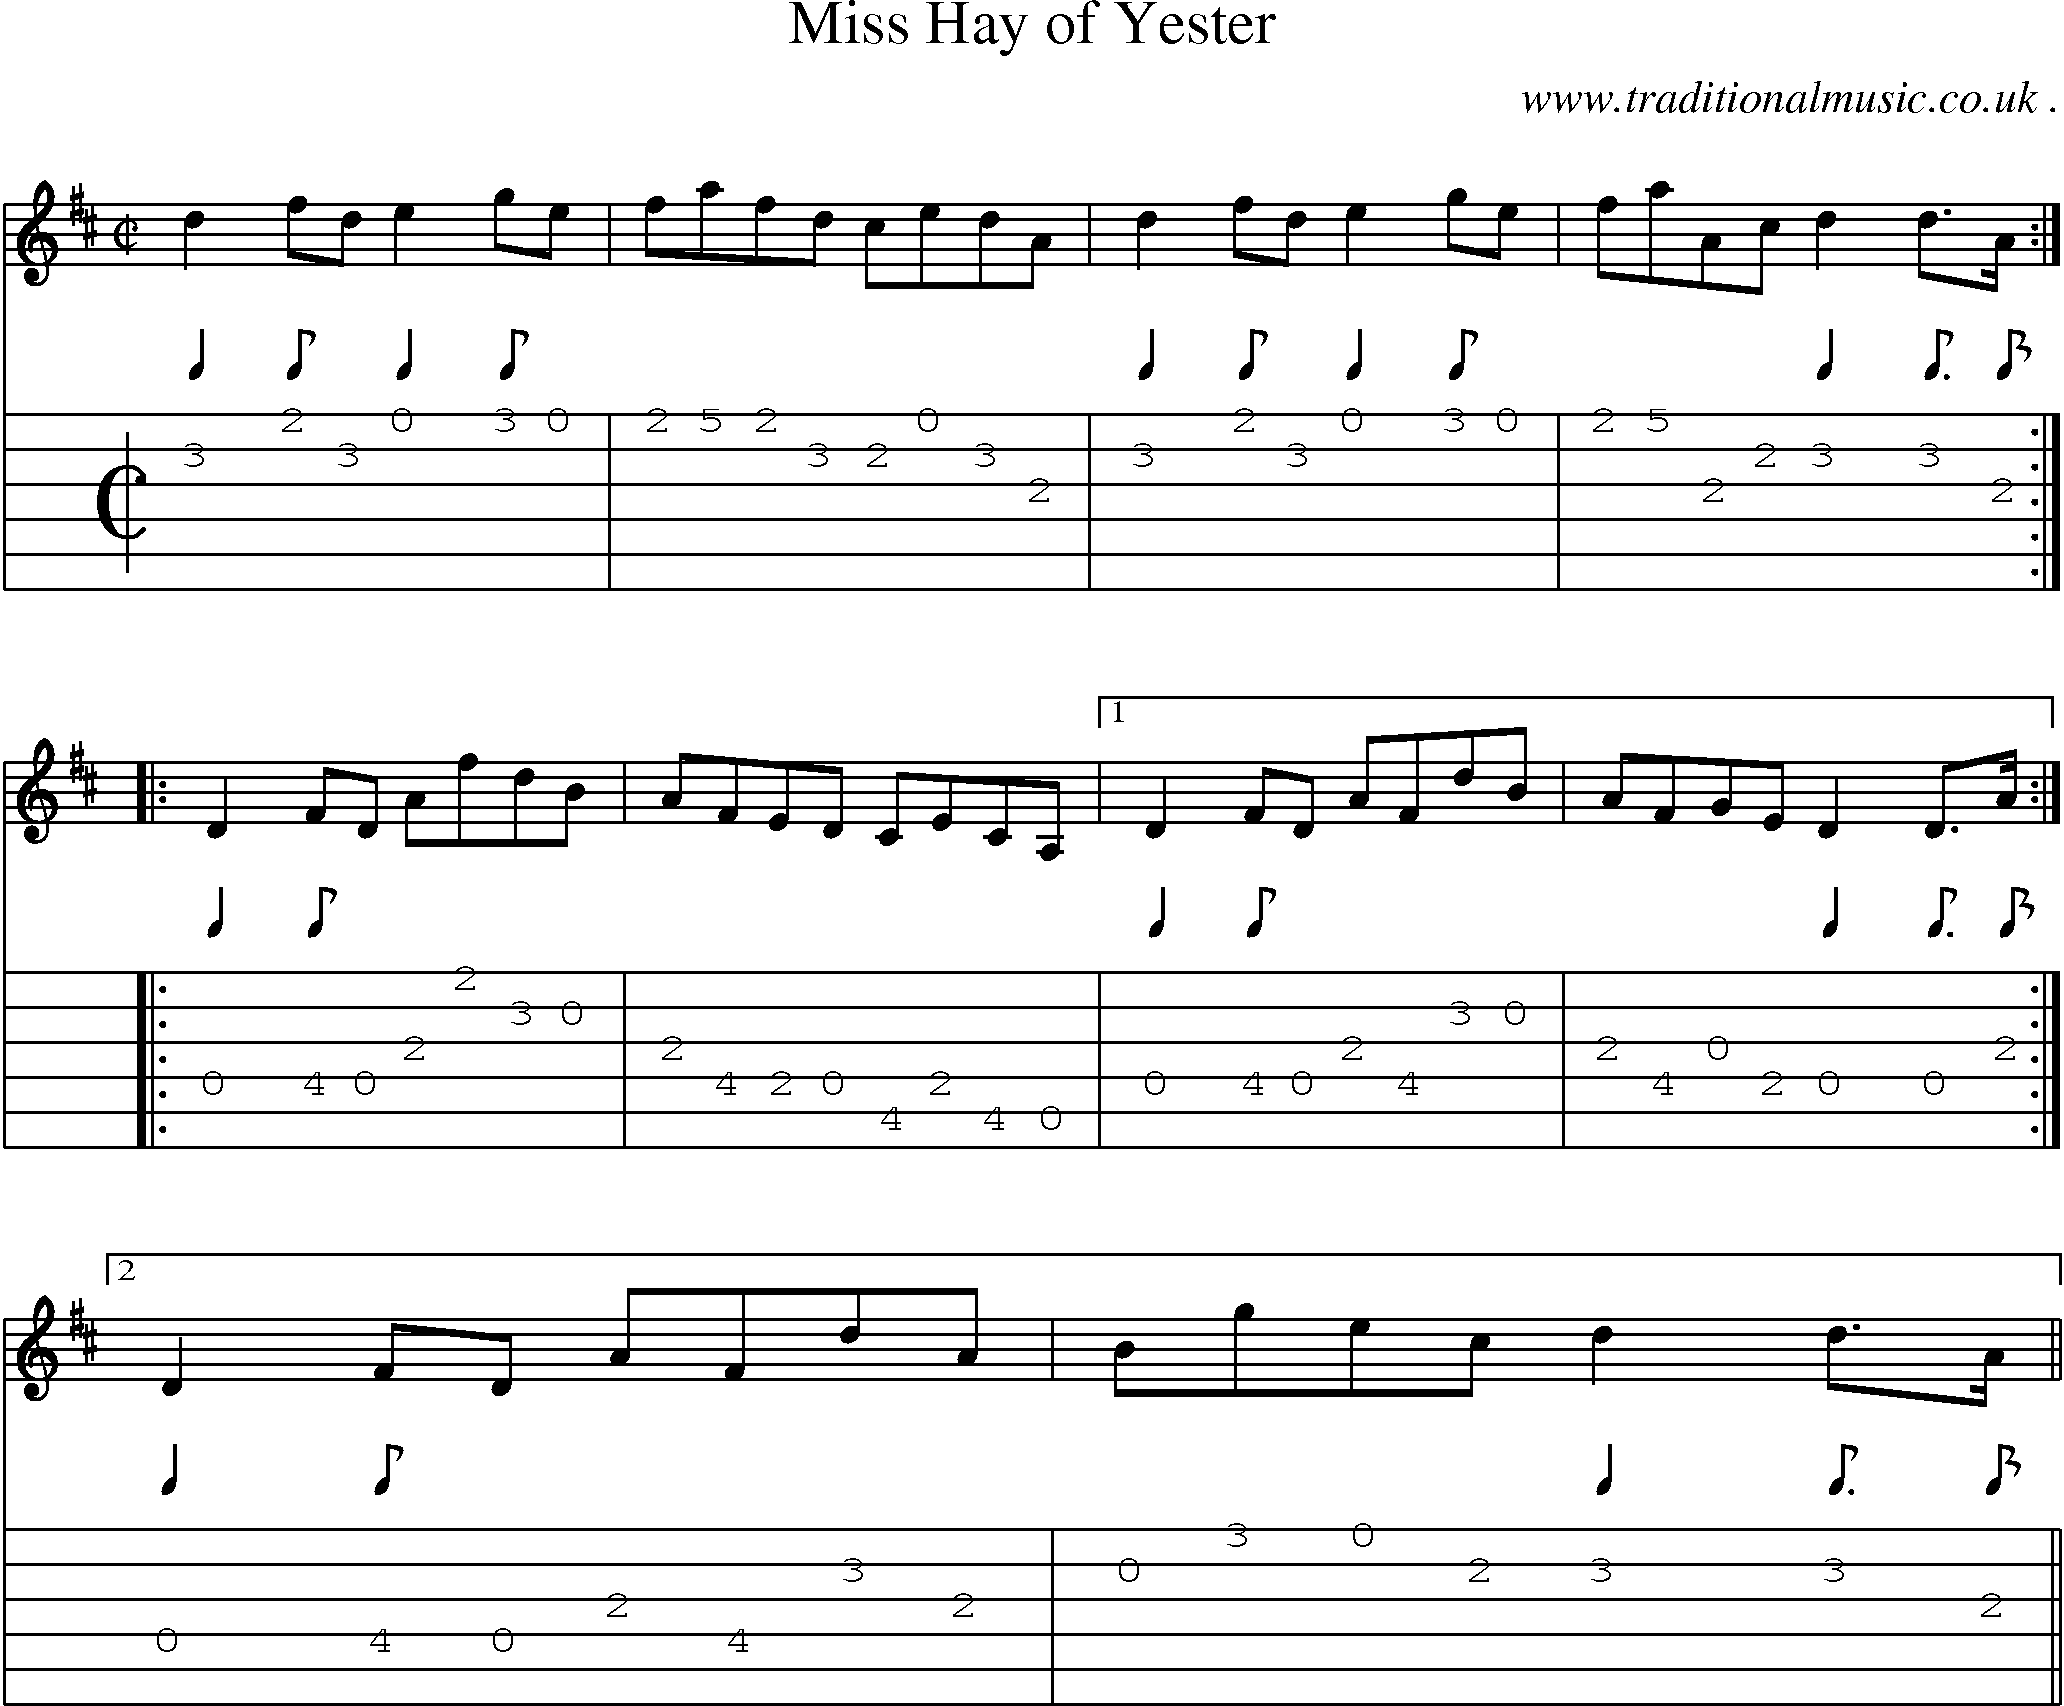 Sheet-music  score, Chords and Guitar Tabs for Miss Hay Of Yester